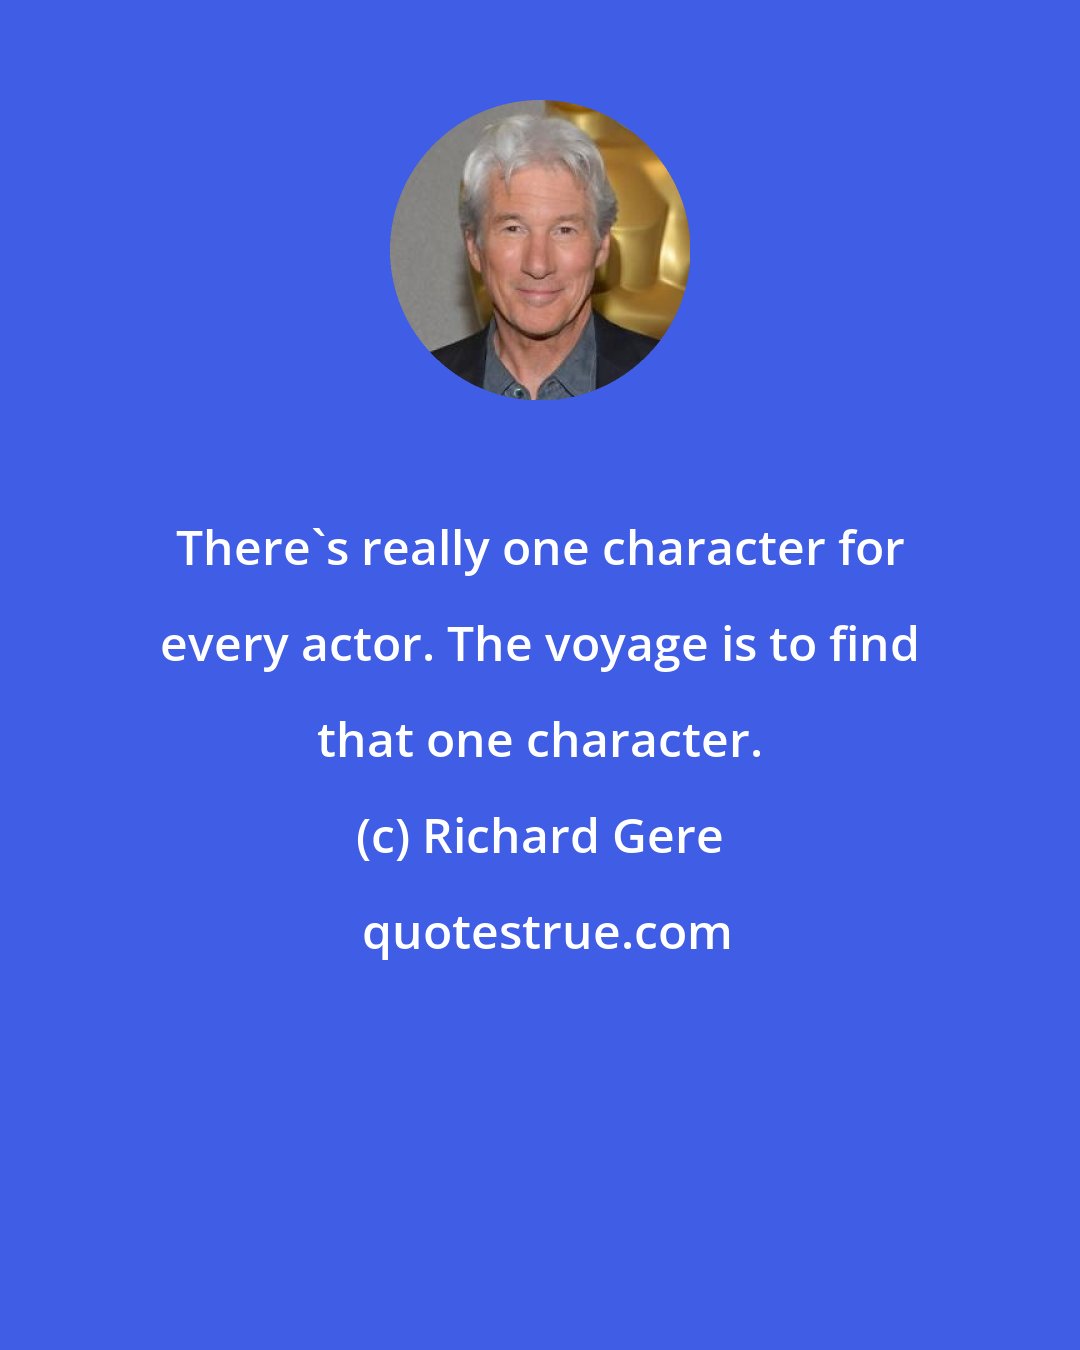 Richard Gere: There's really one character for every actor. The voyage is to find that one character.